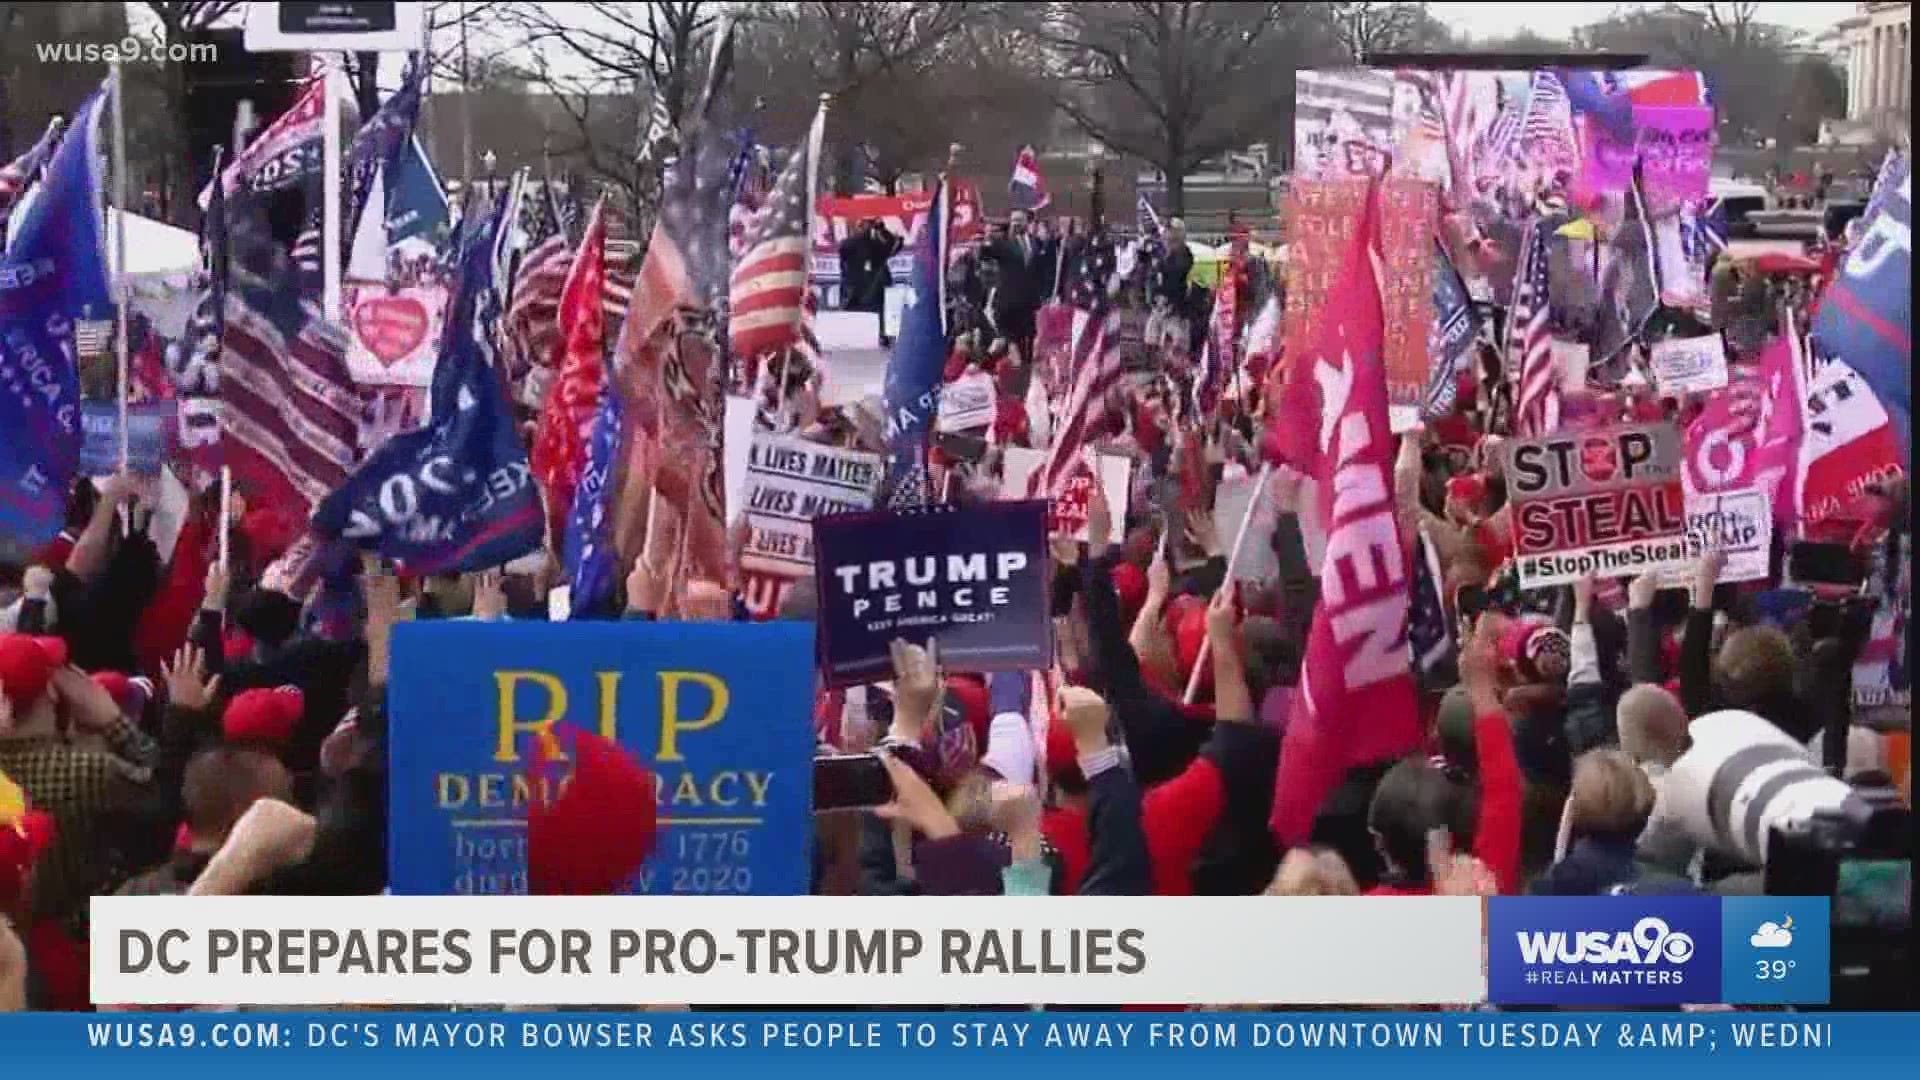 According to MAGA rally websites, several pro-Trump rallies are planned in the District leading up to the day Congress is set to certify the election.